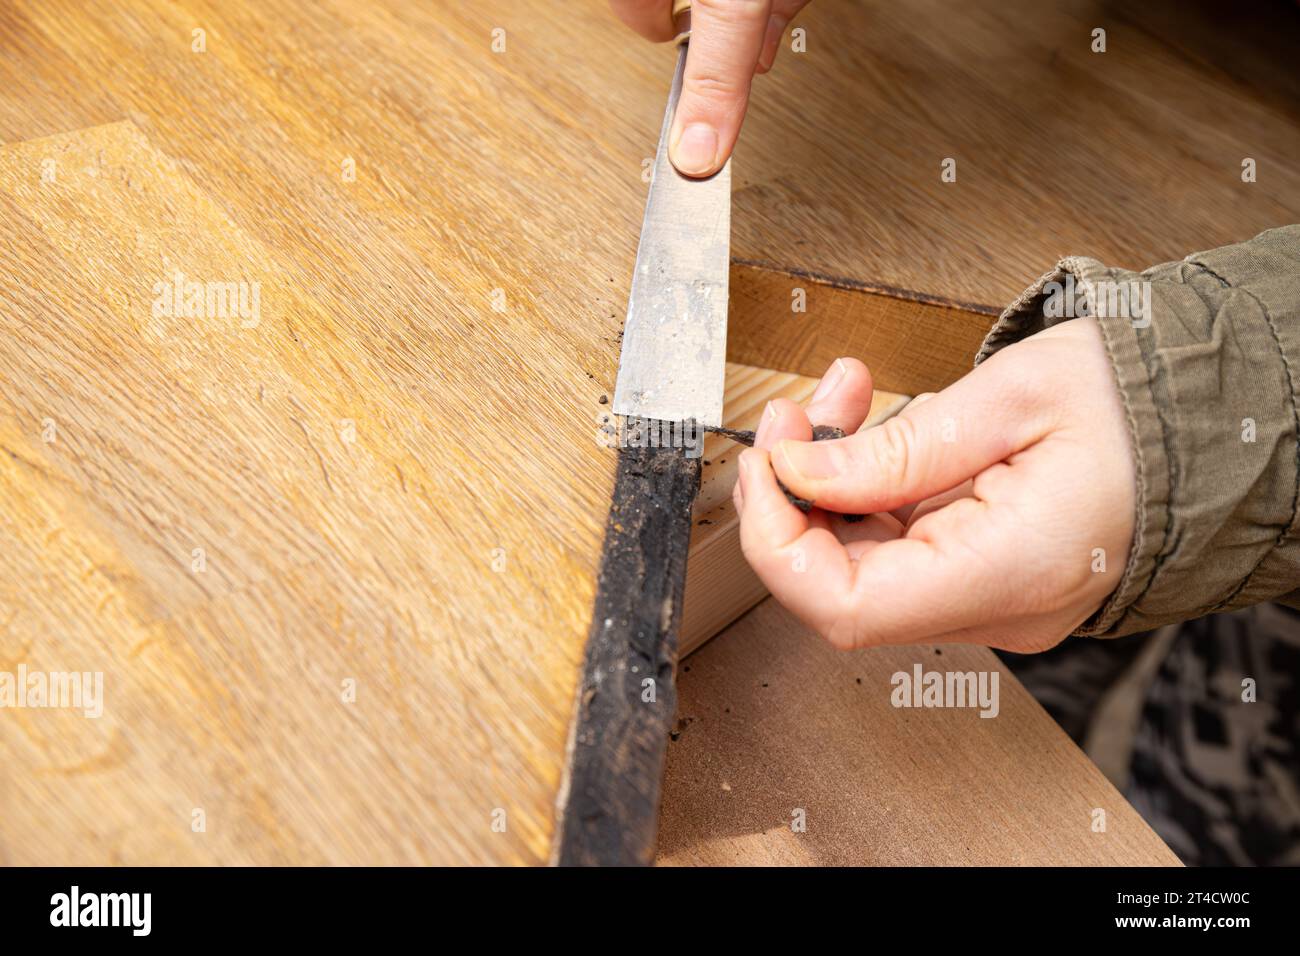 Person hands work remove water damage from butcher block material countertop in home kitchen, sink edge maintenance. Stock Photo